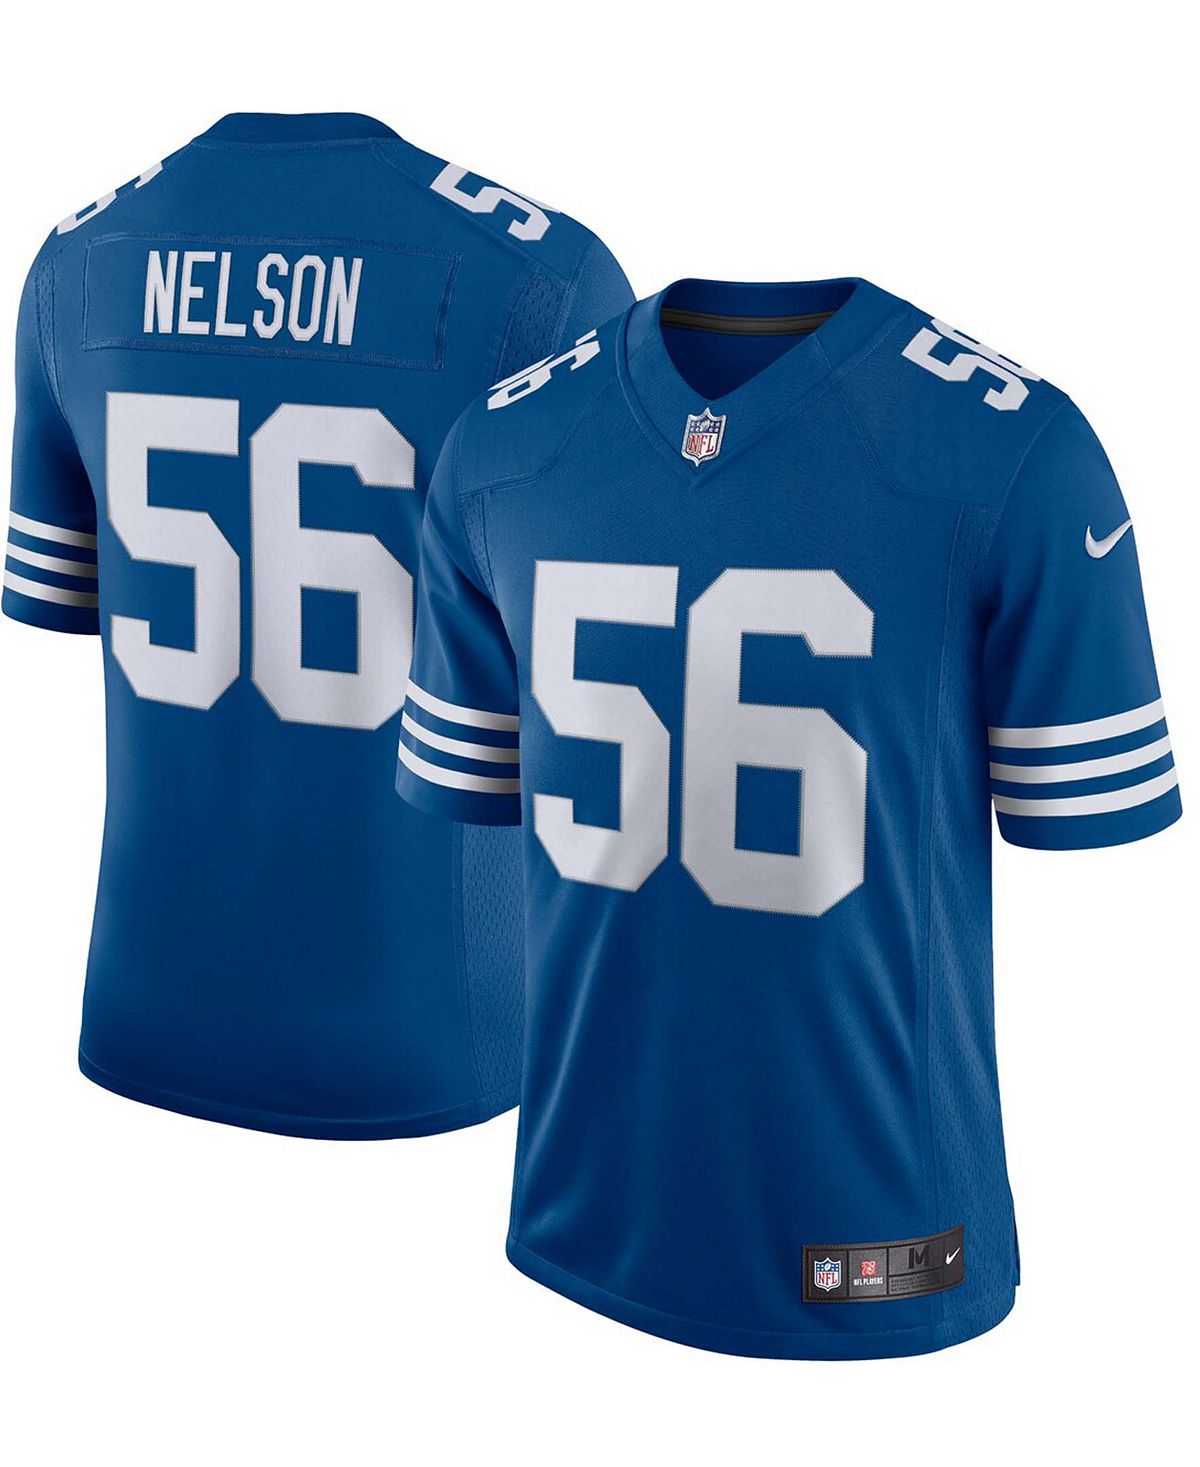 Мужская футболка quenton nelson royal indianapolis colts alternate vapor limited jersey Nike youth s stitch indianapolis american football jersey taylor nelson leonard manning pittman hilton rivers customized fans jerseys